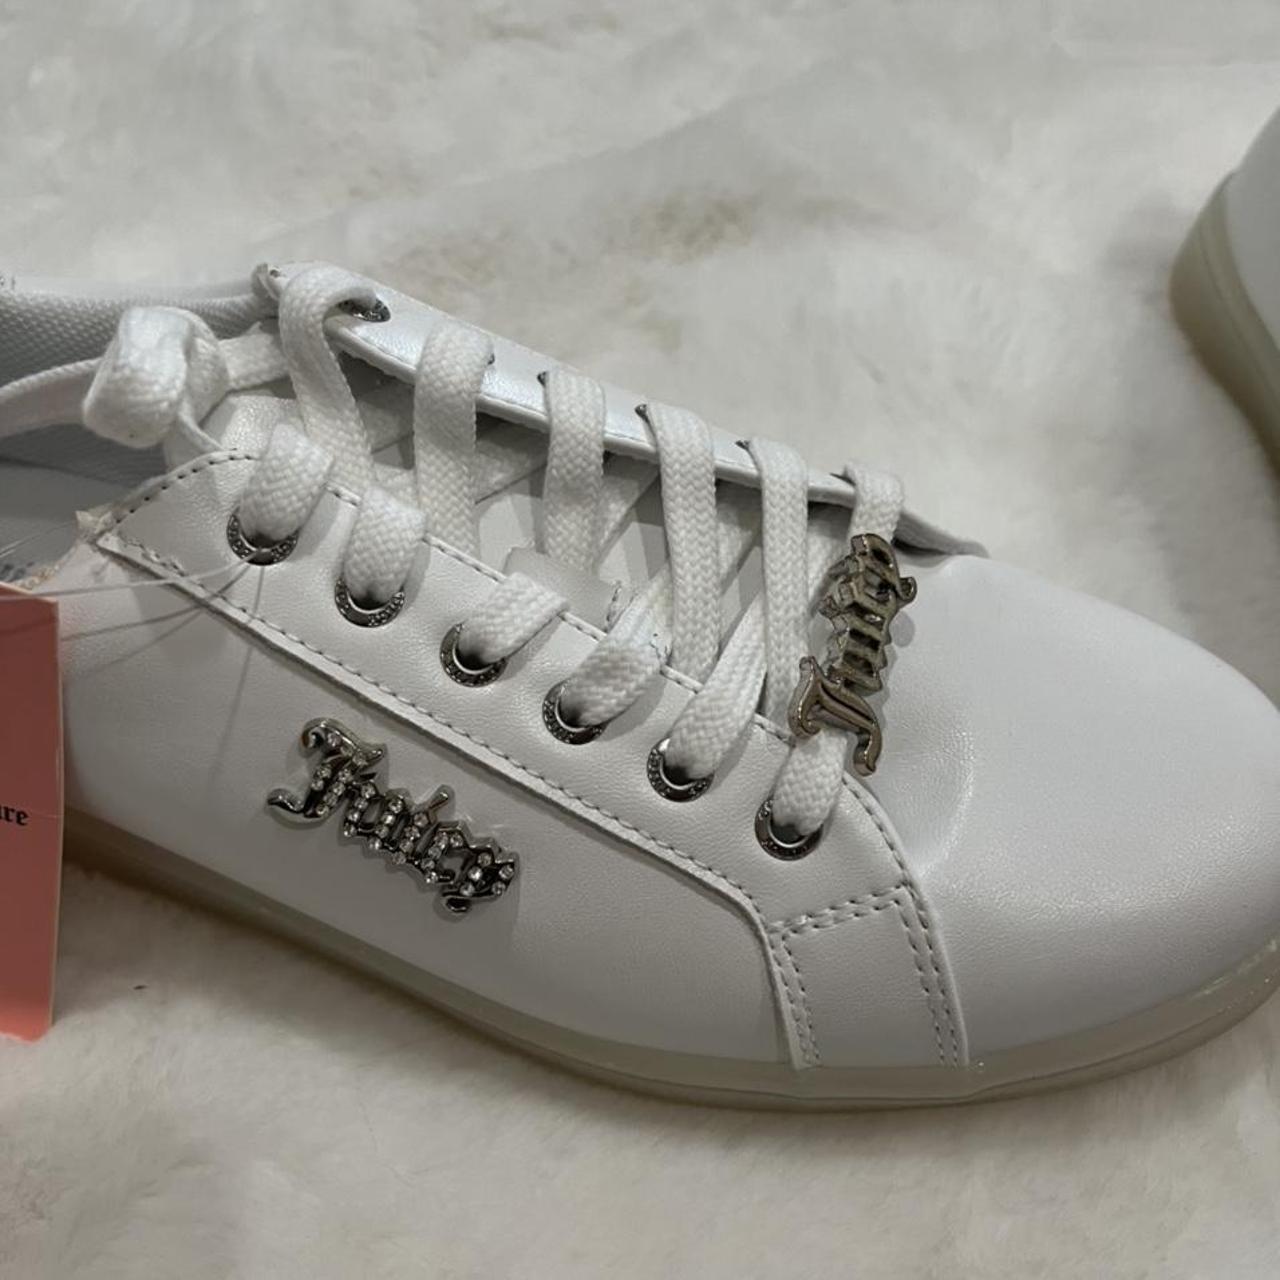 Juicy Couture Casual Women's Shoes: Boots, Sneakers, Heels & More - Macy's